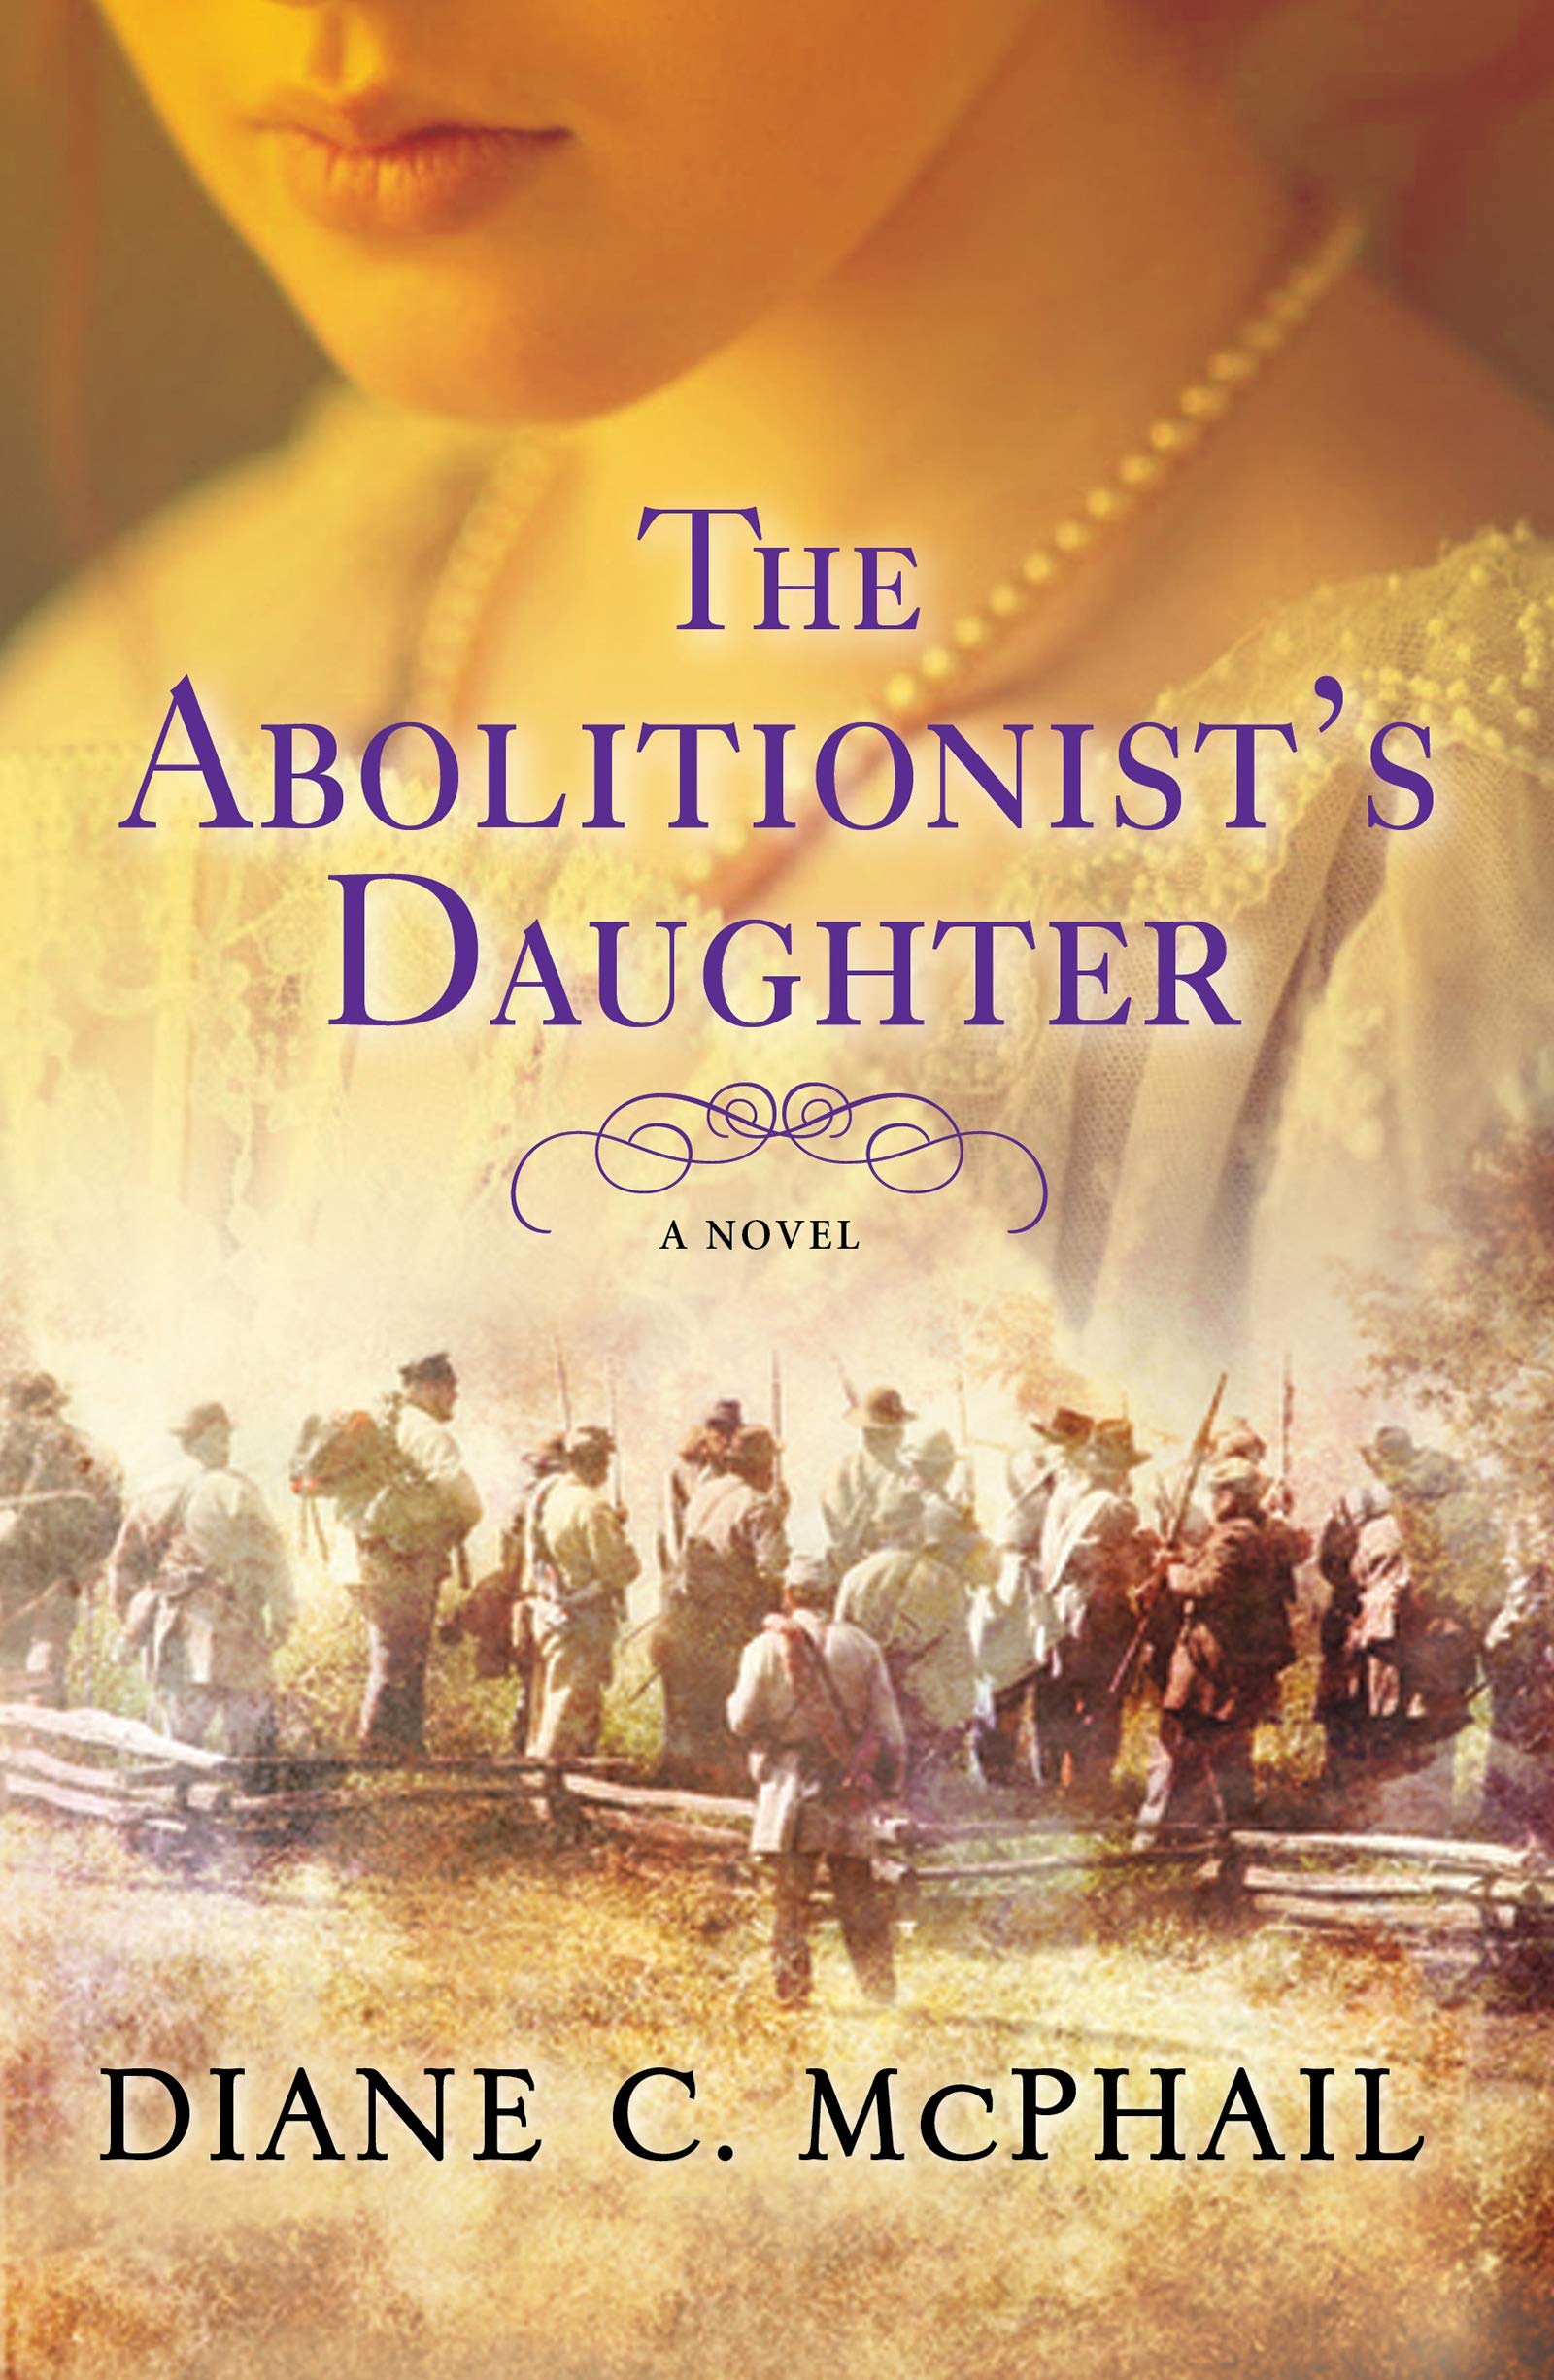 The Abolitionist's Daughter